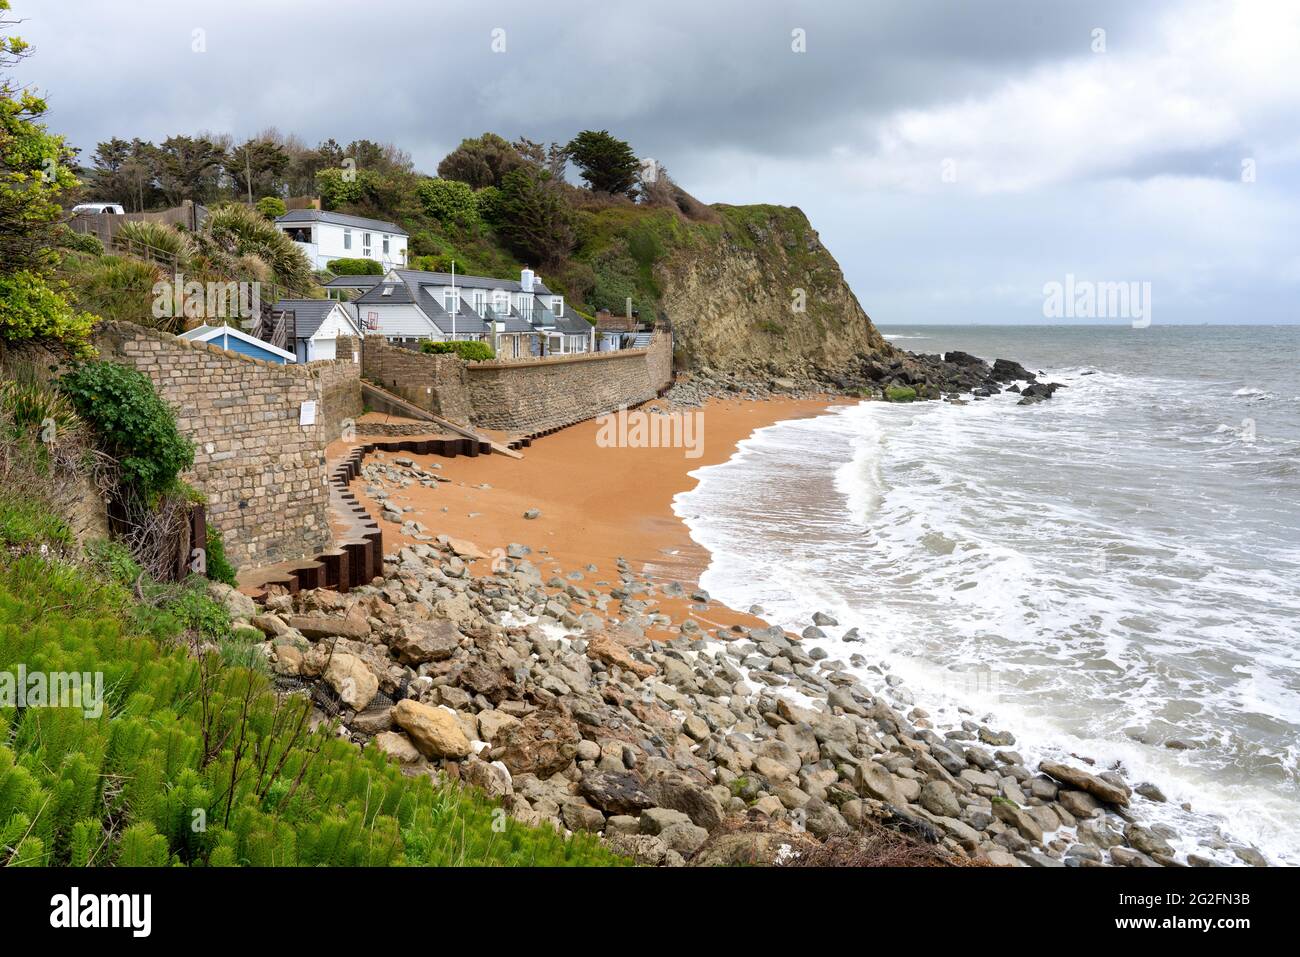 Orchard Bay a small sandy beach near Ventnor on the south coast of the Isle of Wight Hampshire UK Stock Photo